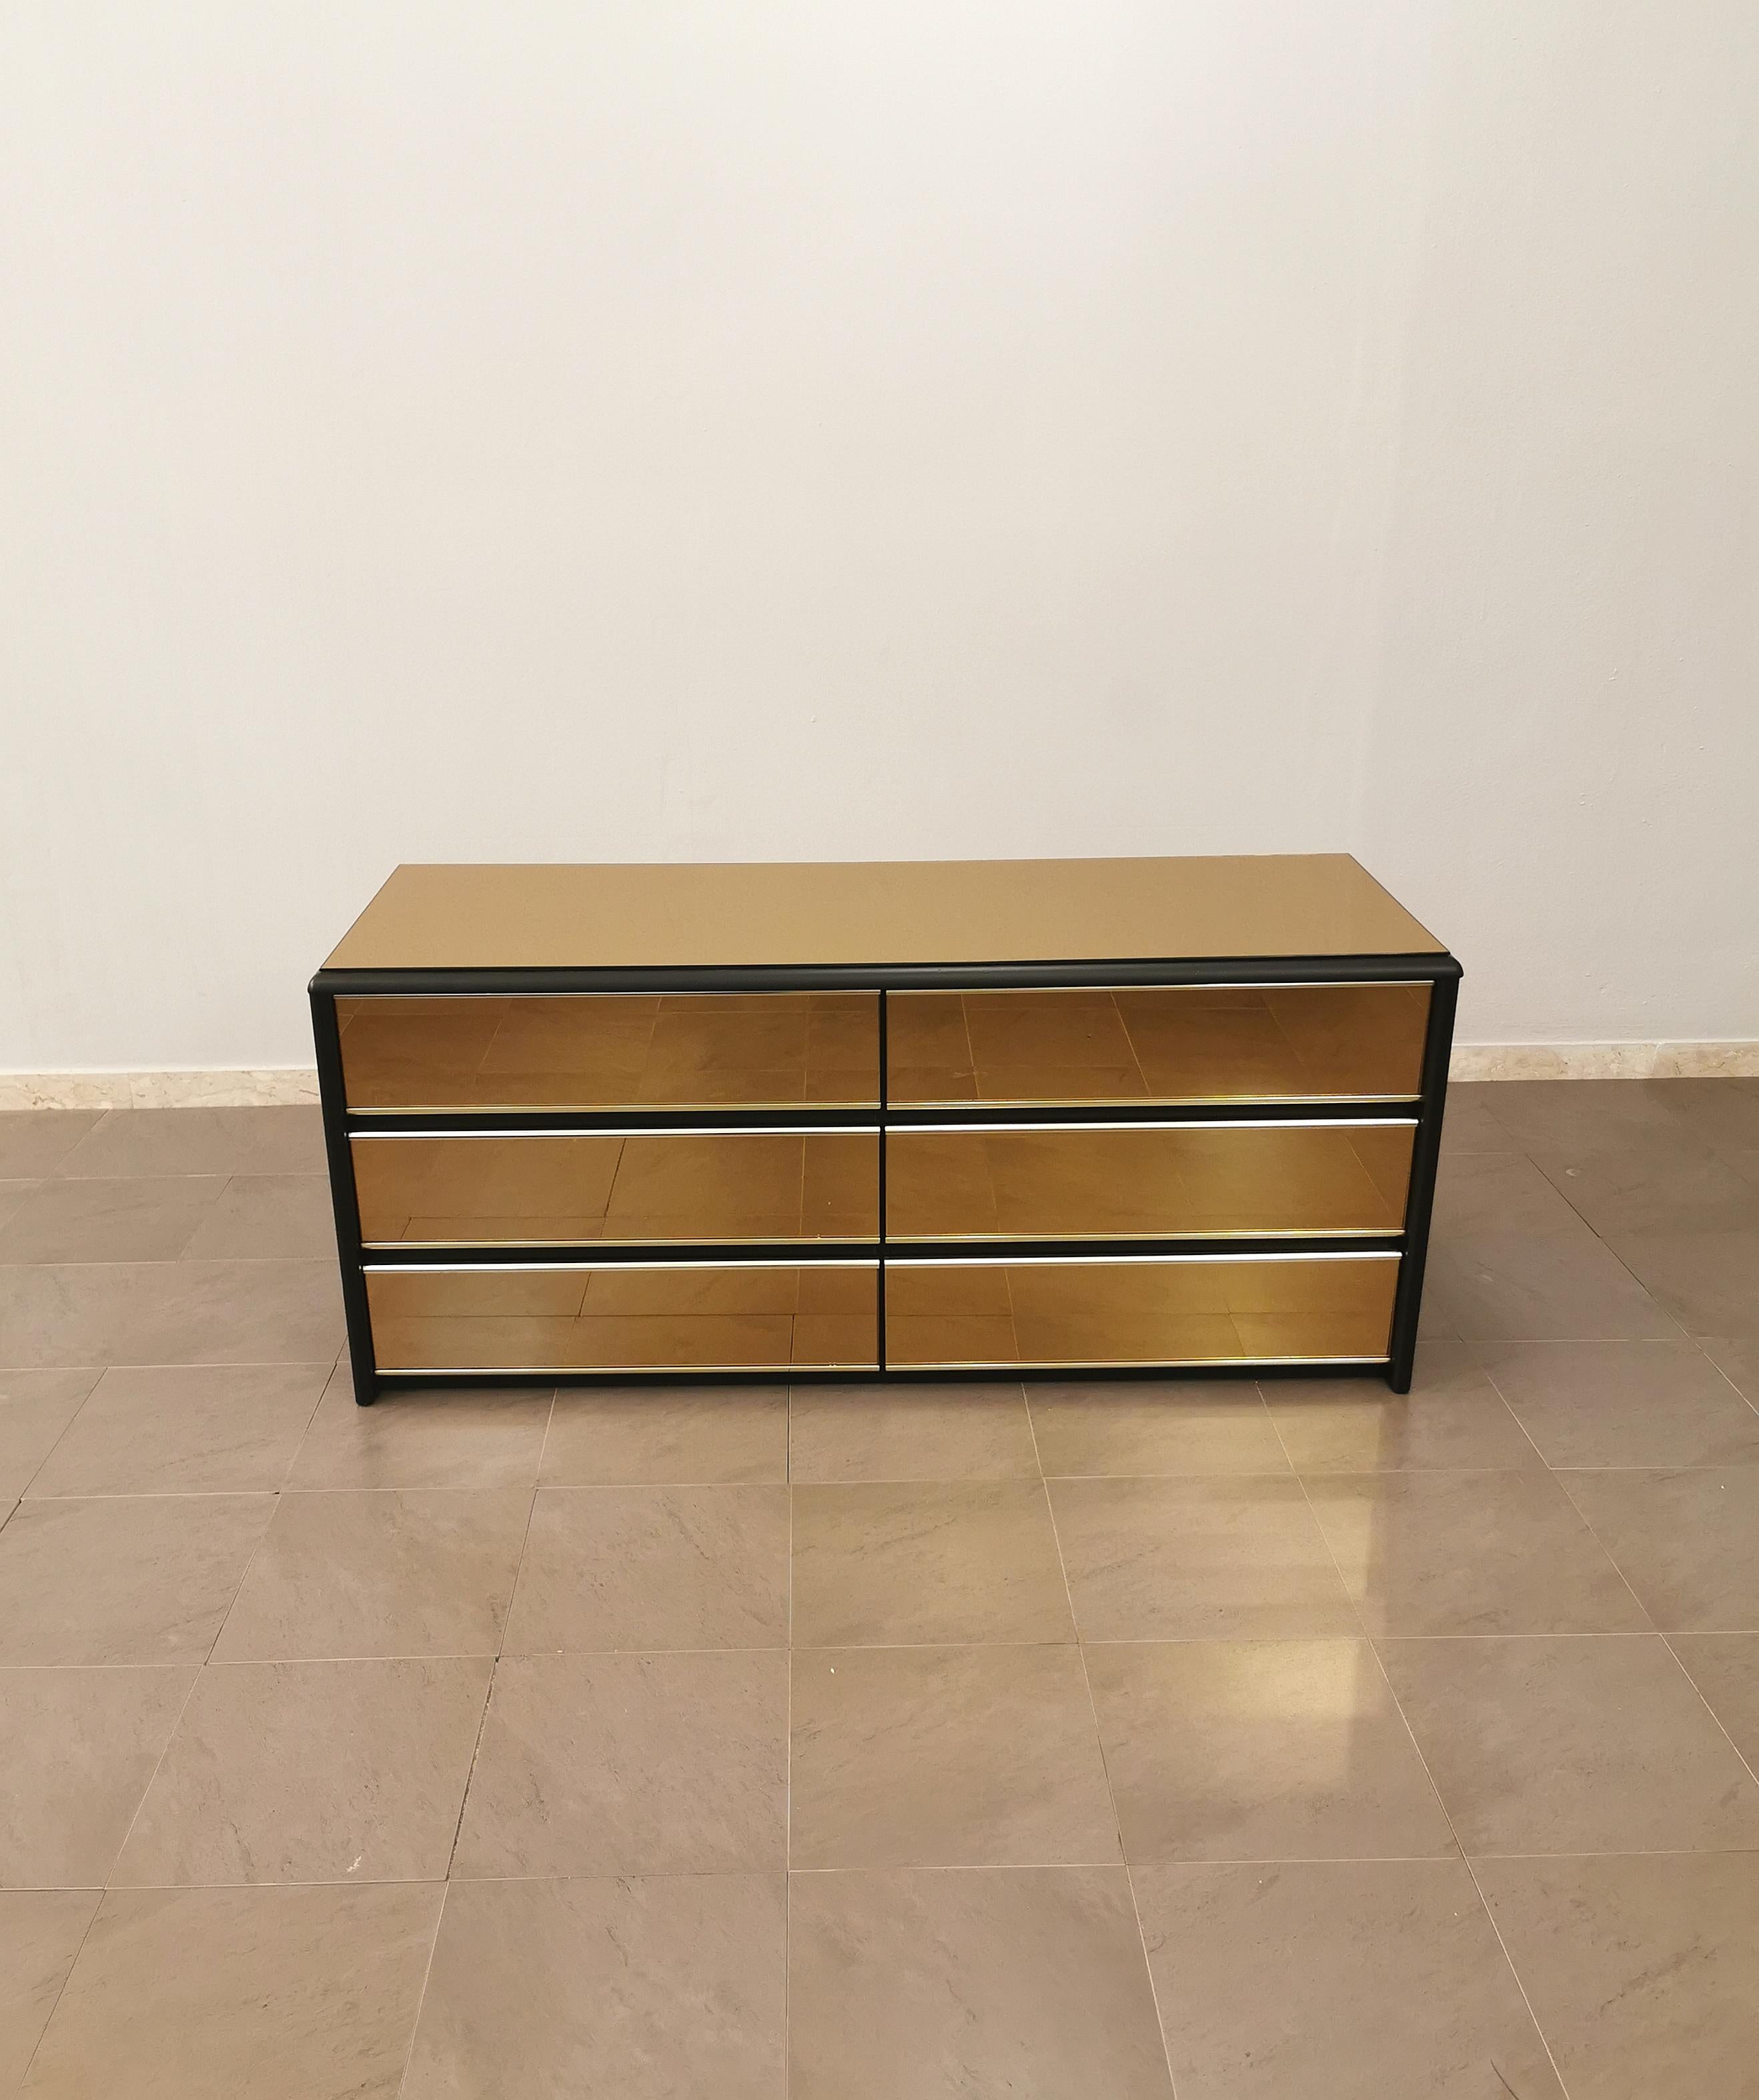 Chest of drawers by an unknown designer produced in Italy in the 70s. This elegant chest of drawers has a matt black wooden structure and rounded edges with top and drawers in caramel-colored mirrored glass and golden aluminum finishes.



Note: We